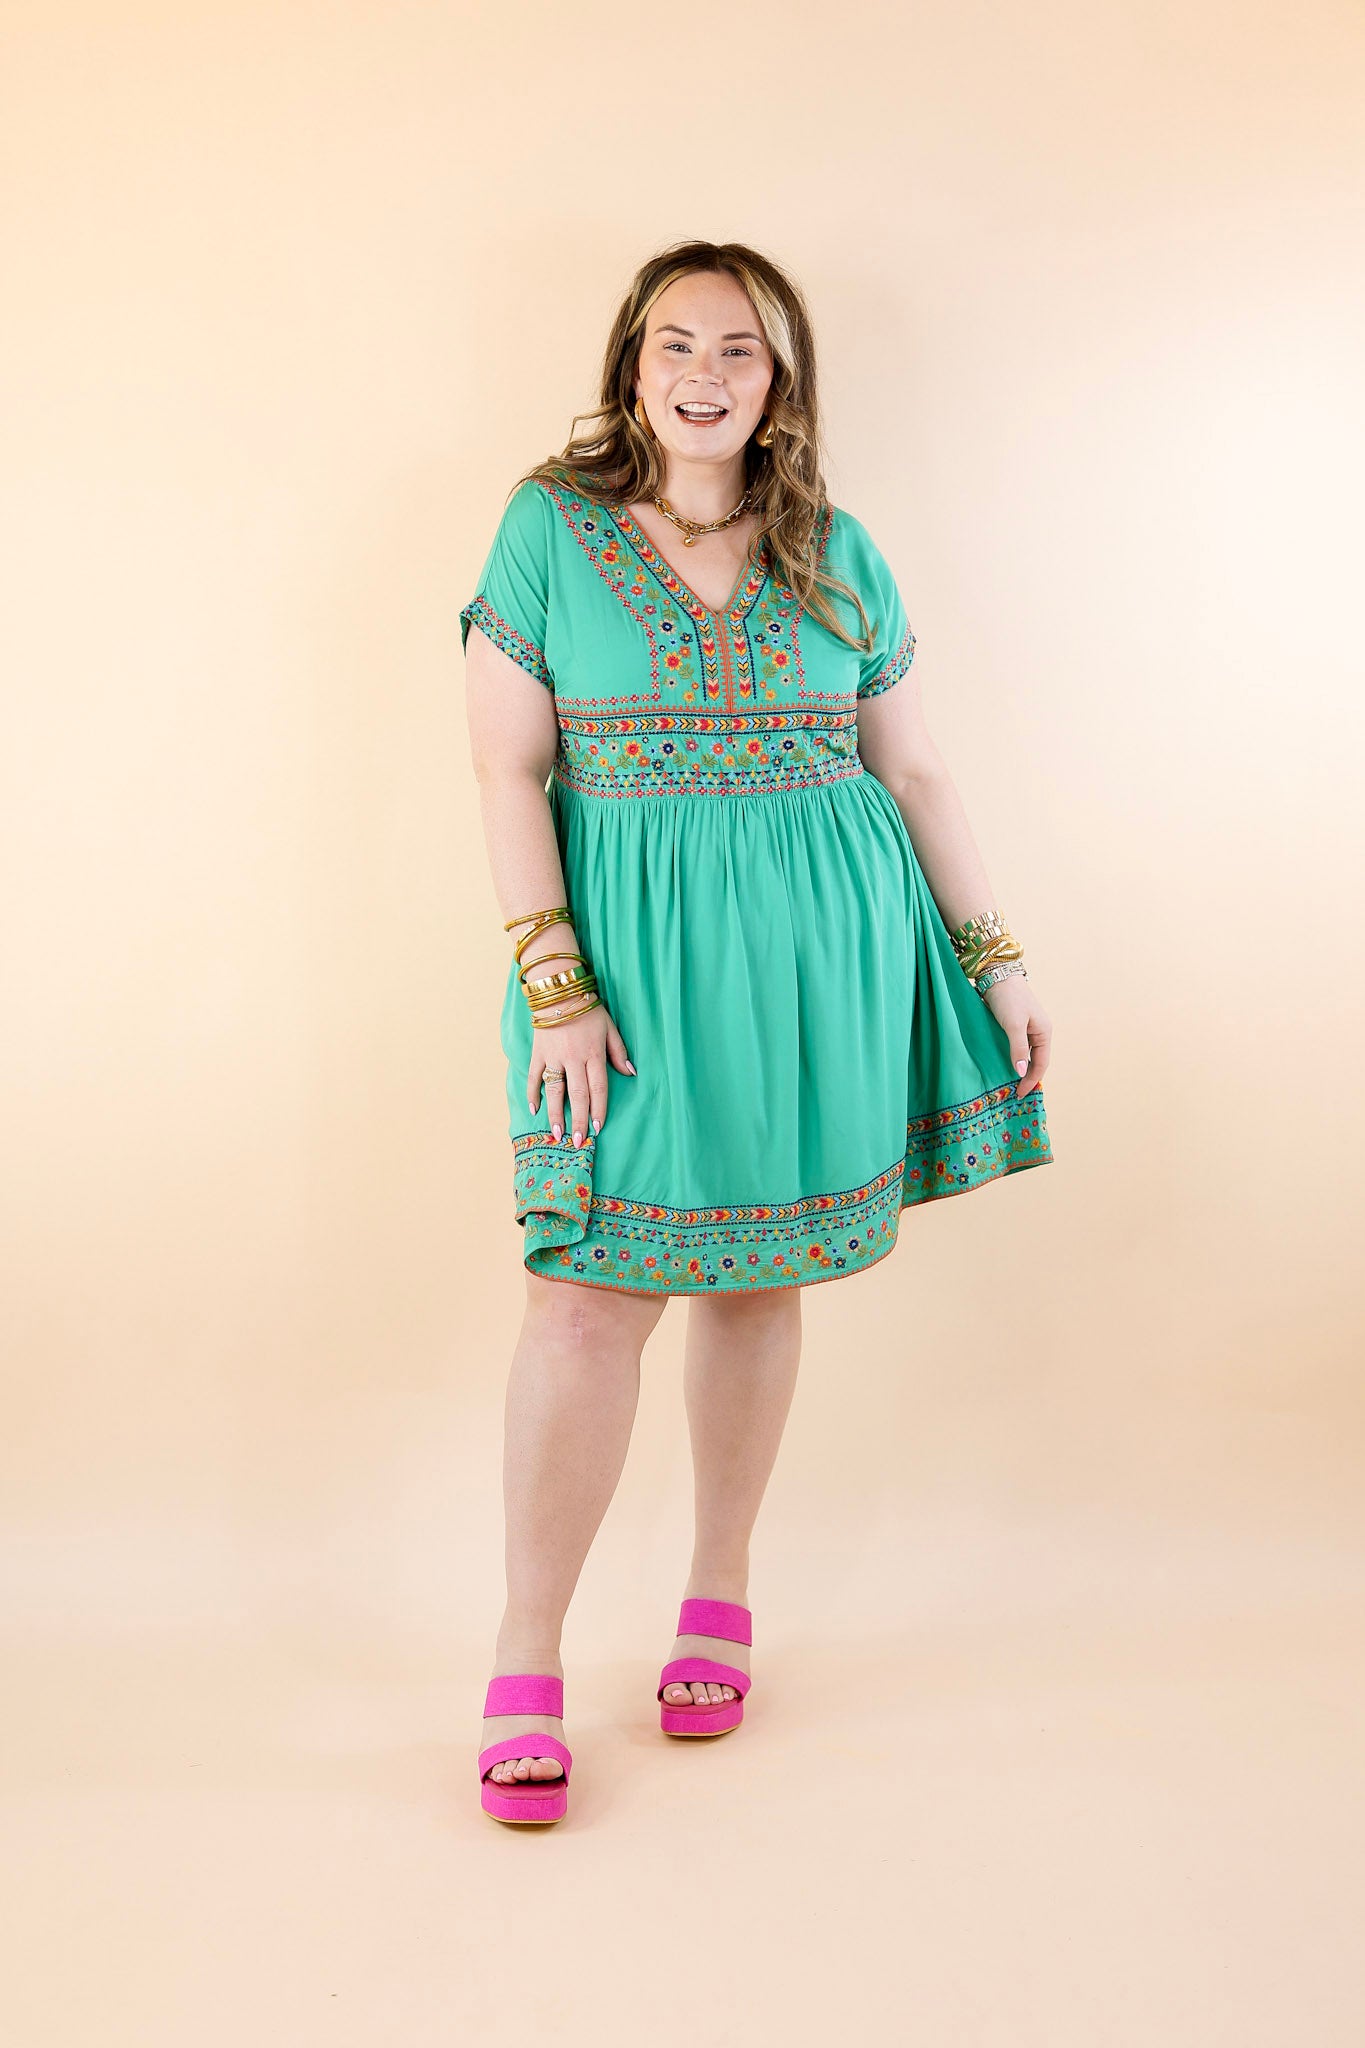 Passing Through V Neck Embroidered Dress with Short Sleeves in Mint Green - Giddy Up Glamour Boutique